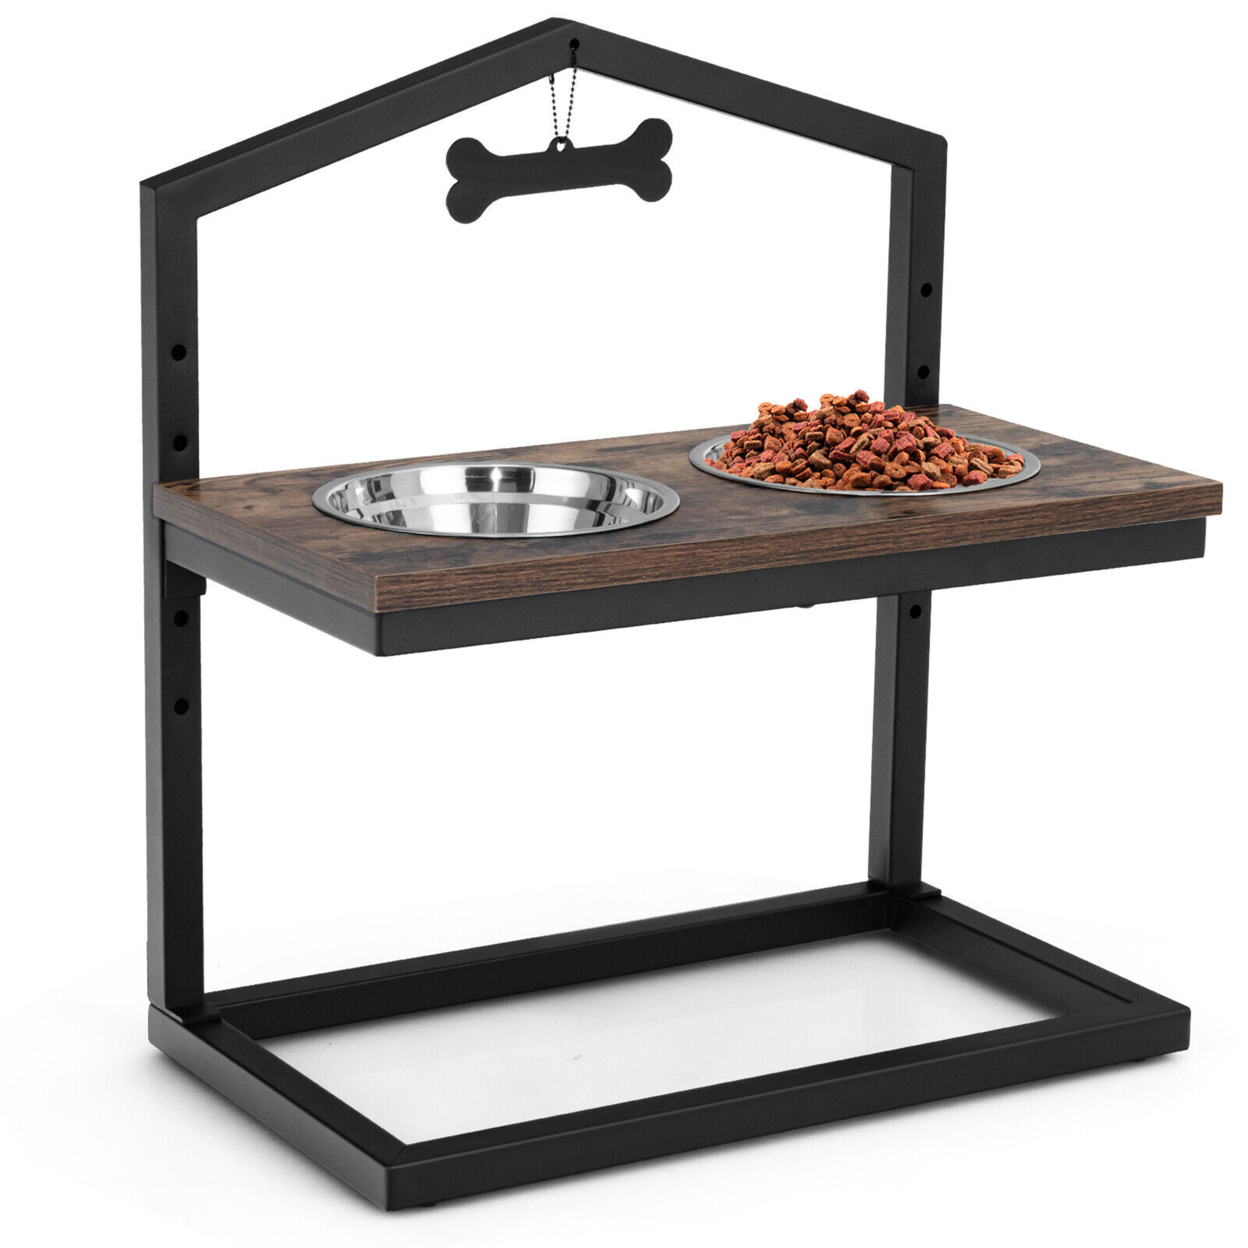 Elevated Dog Bowls Feeder Adjustable Raised Bowls Stand With 5 Heights - Black+Coffee